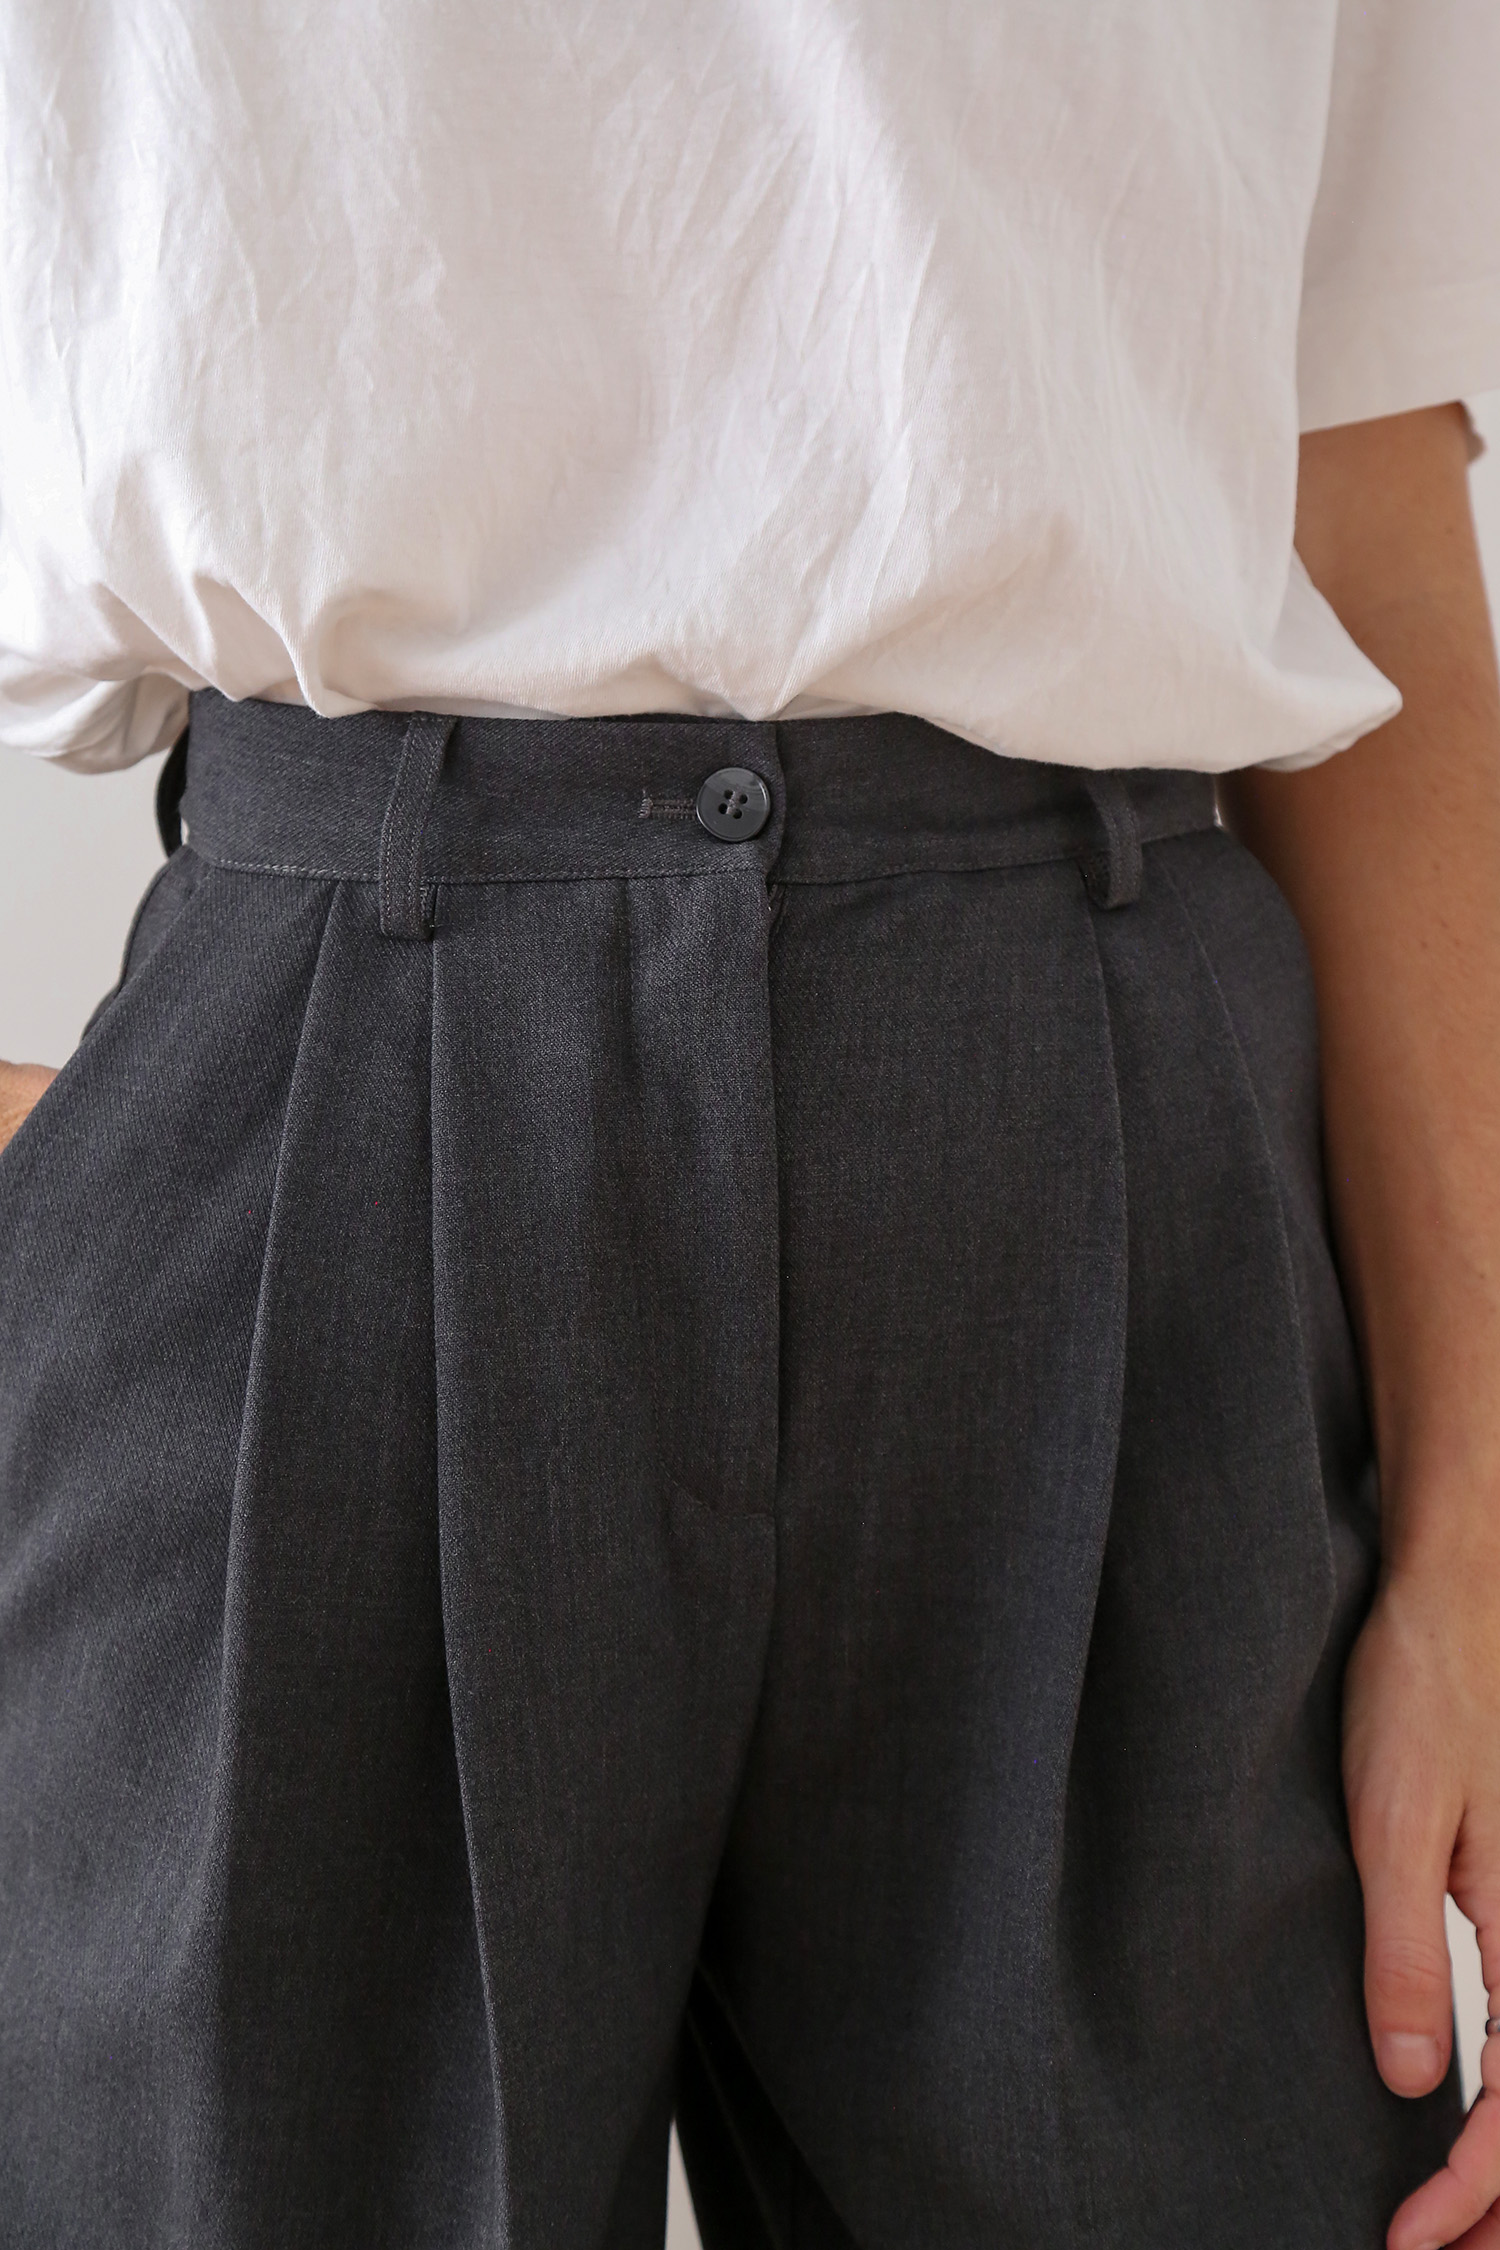 Minimal trousers close up